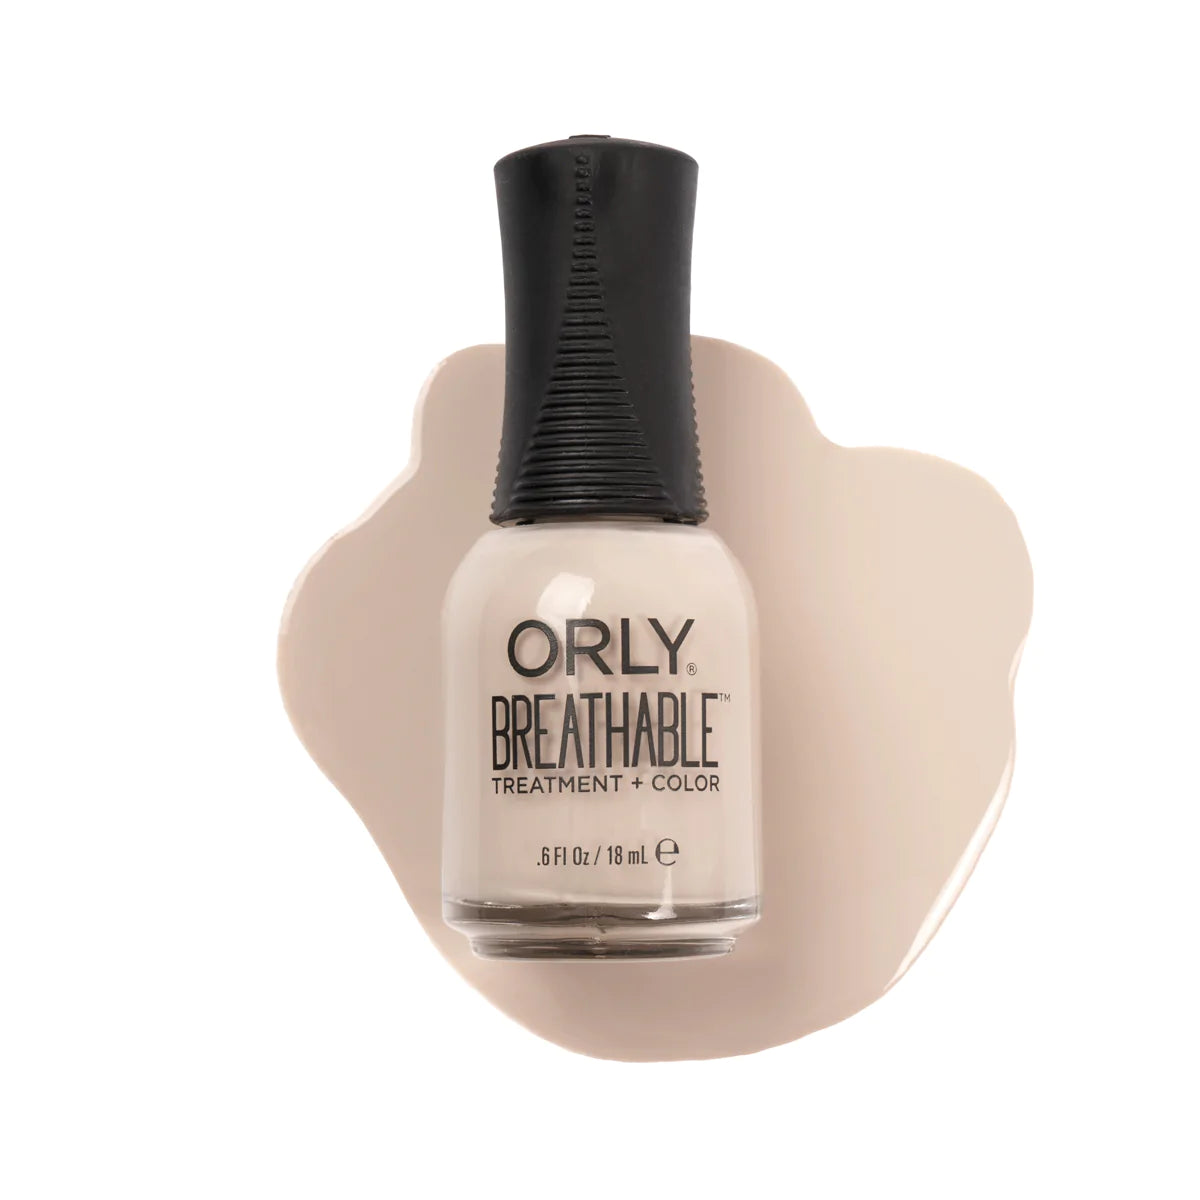 ORLY Breathable Bare Necessity